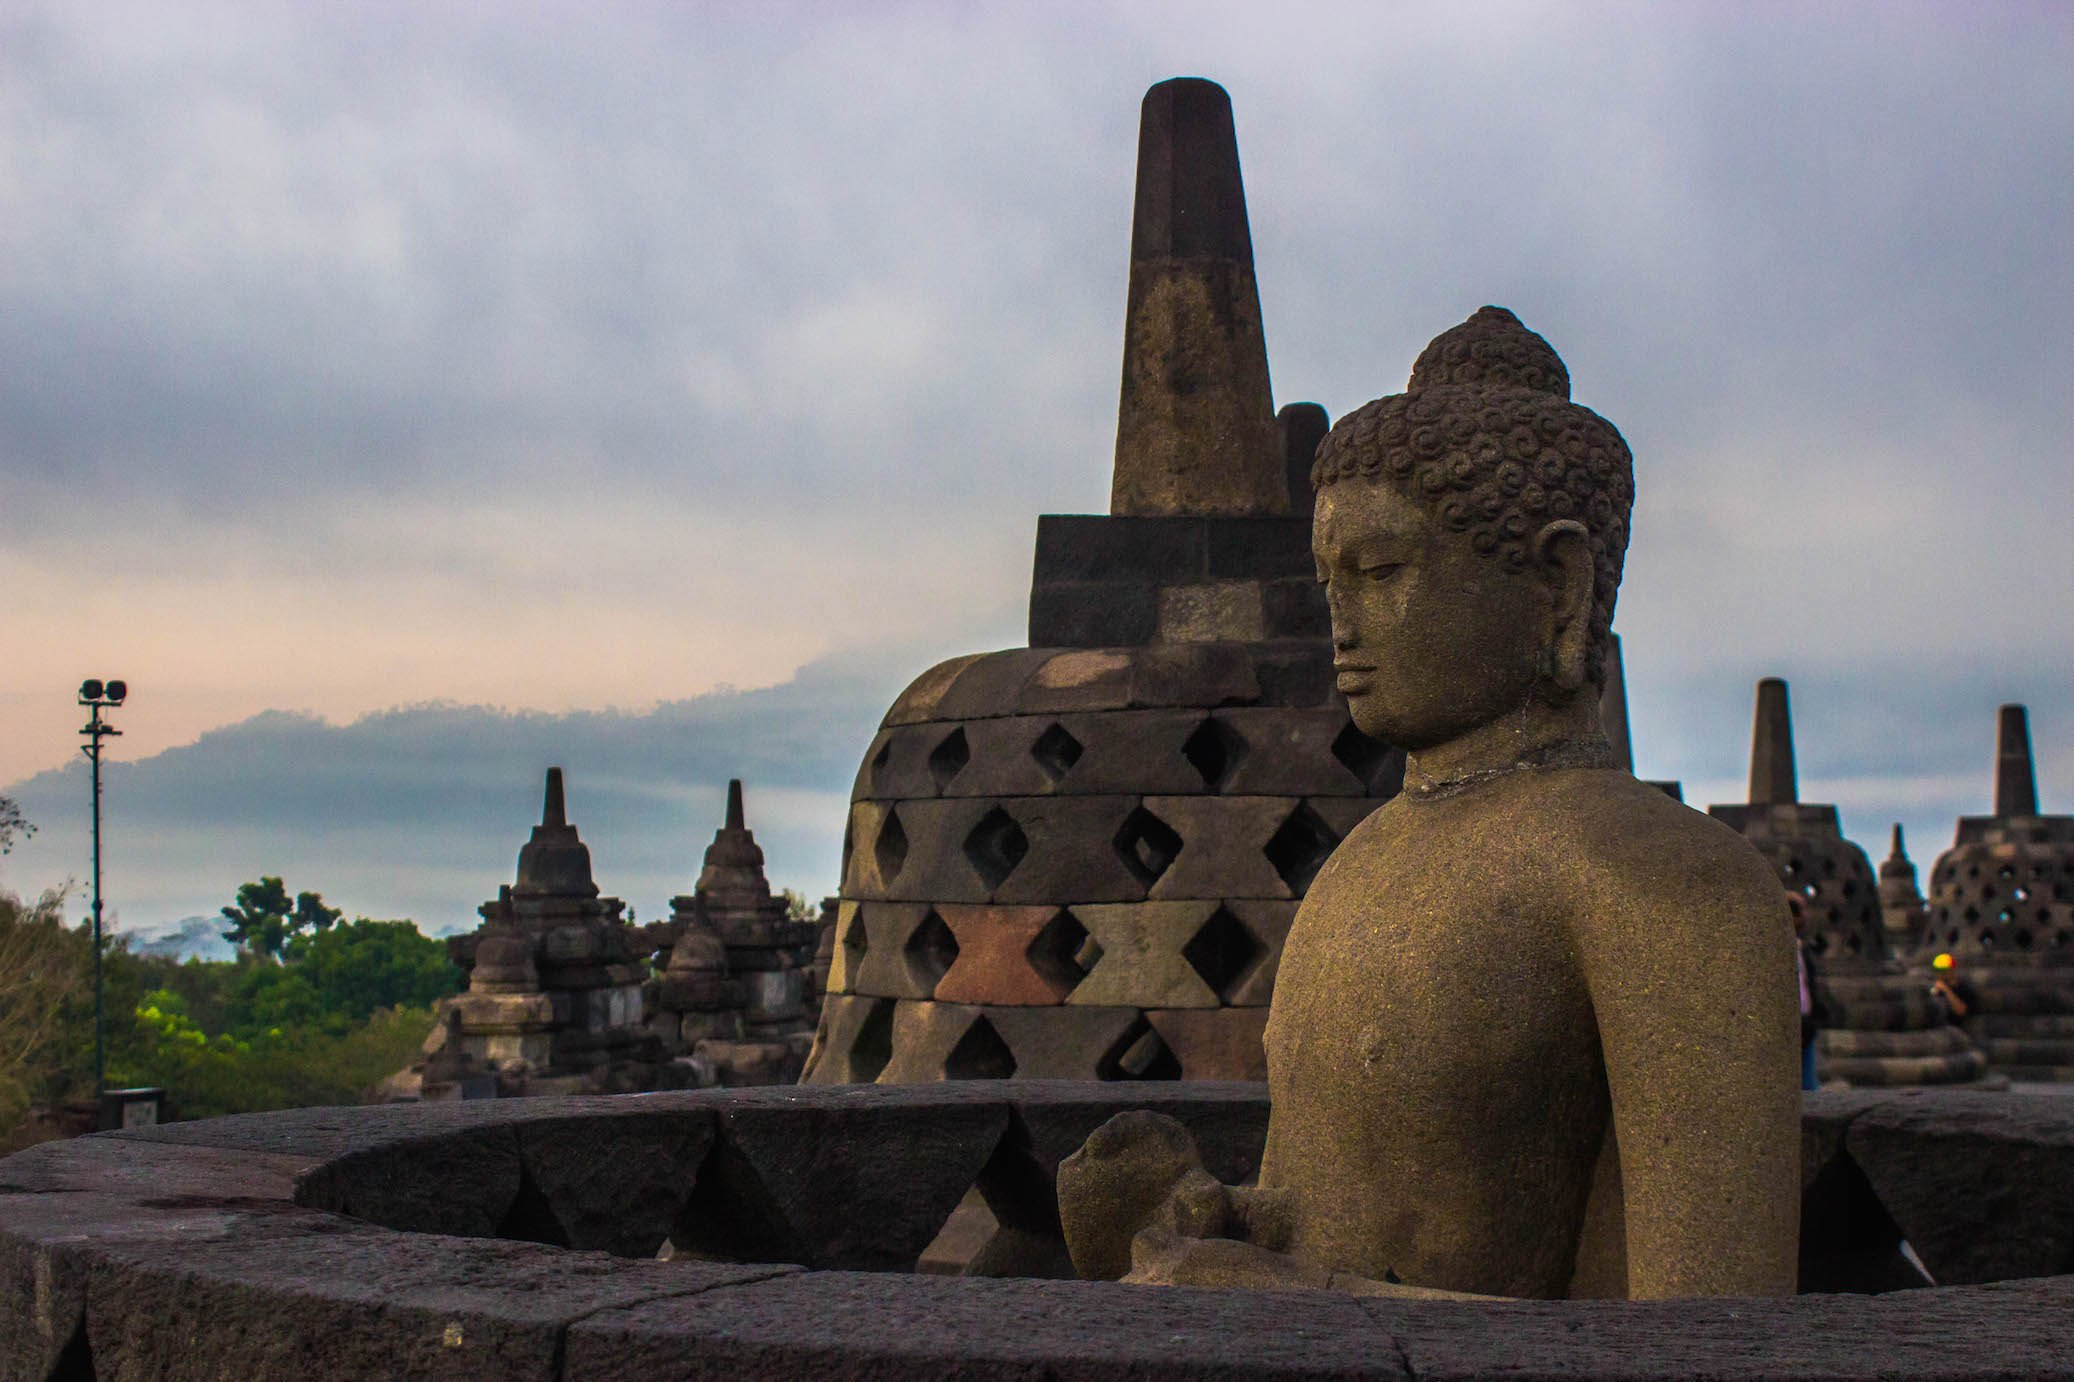 One of the many Buddha statues in Borobudur, Indonesia